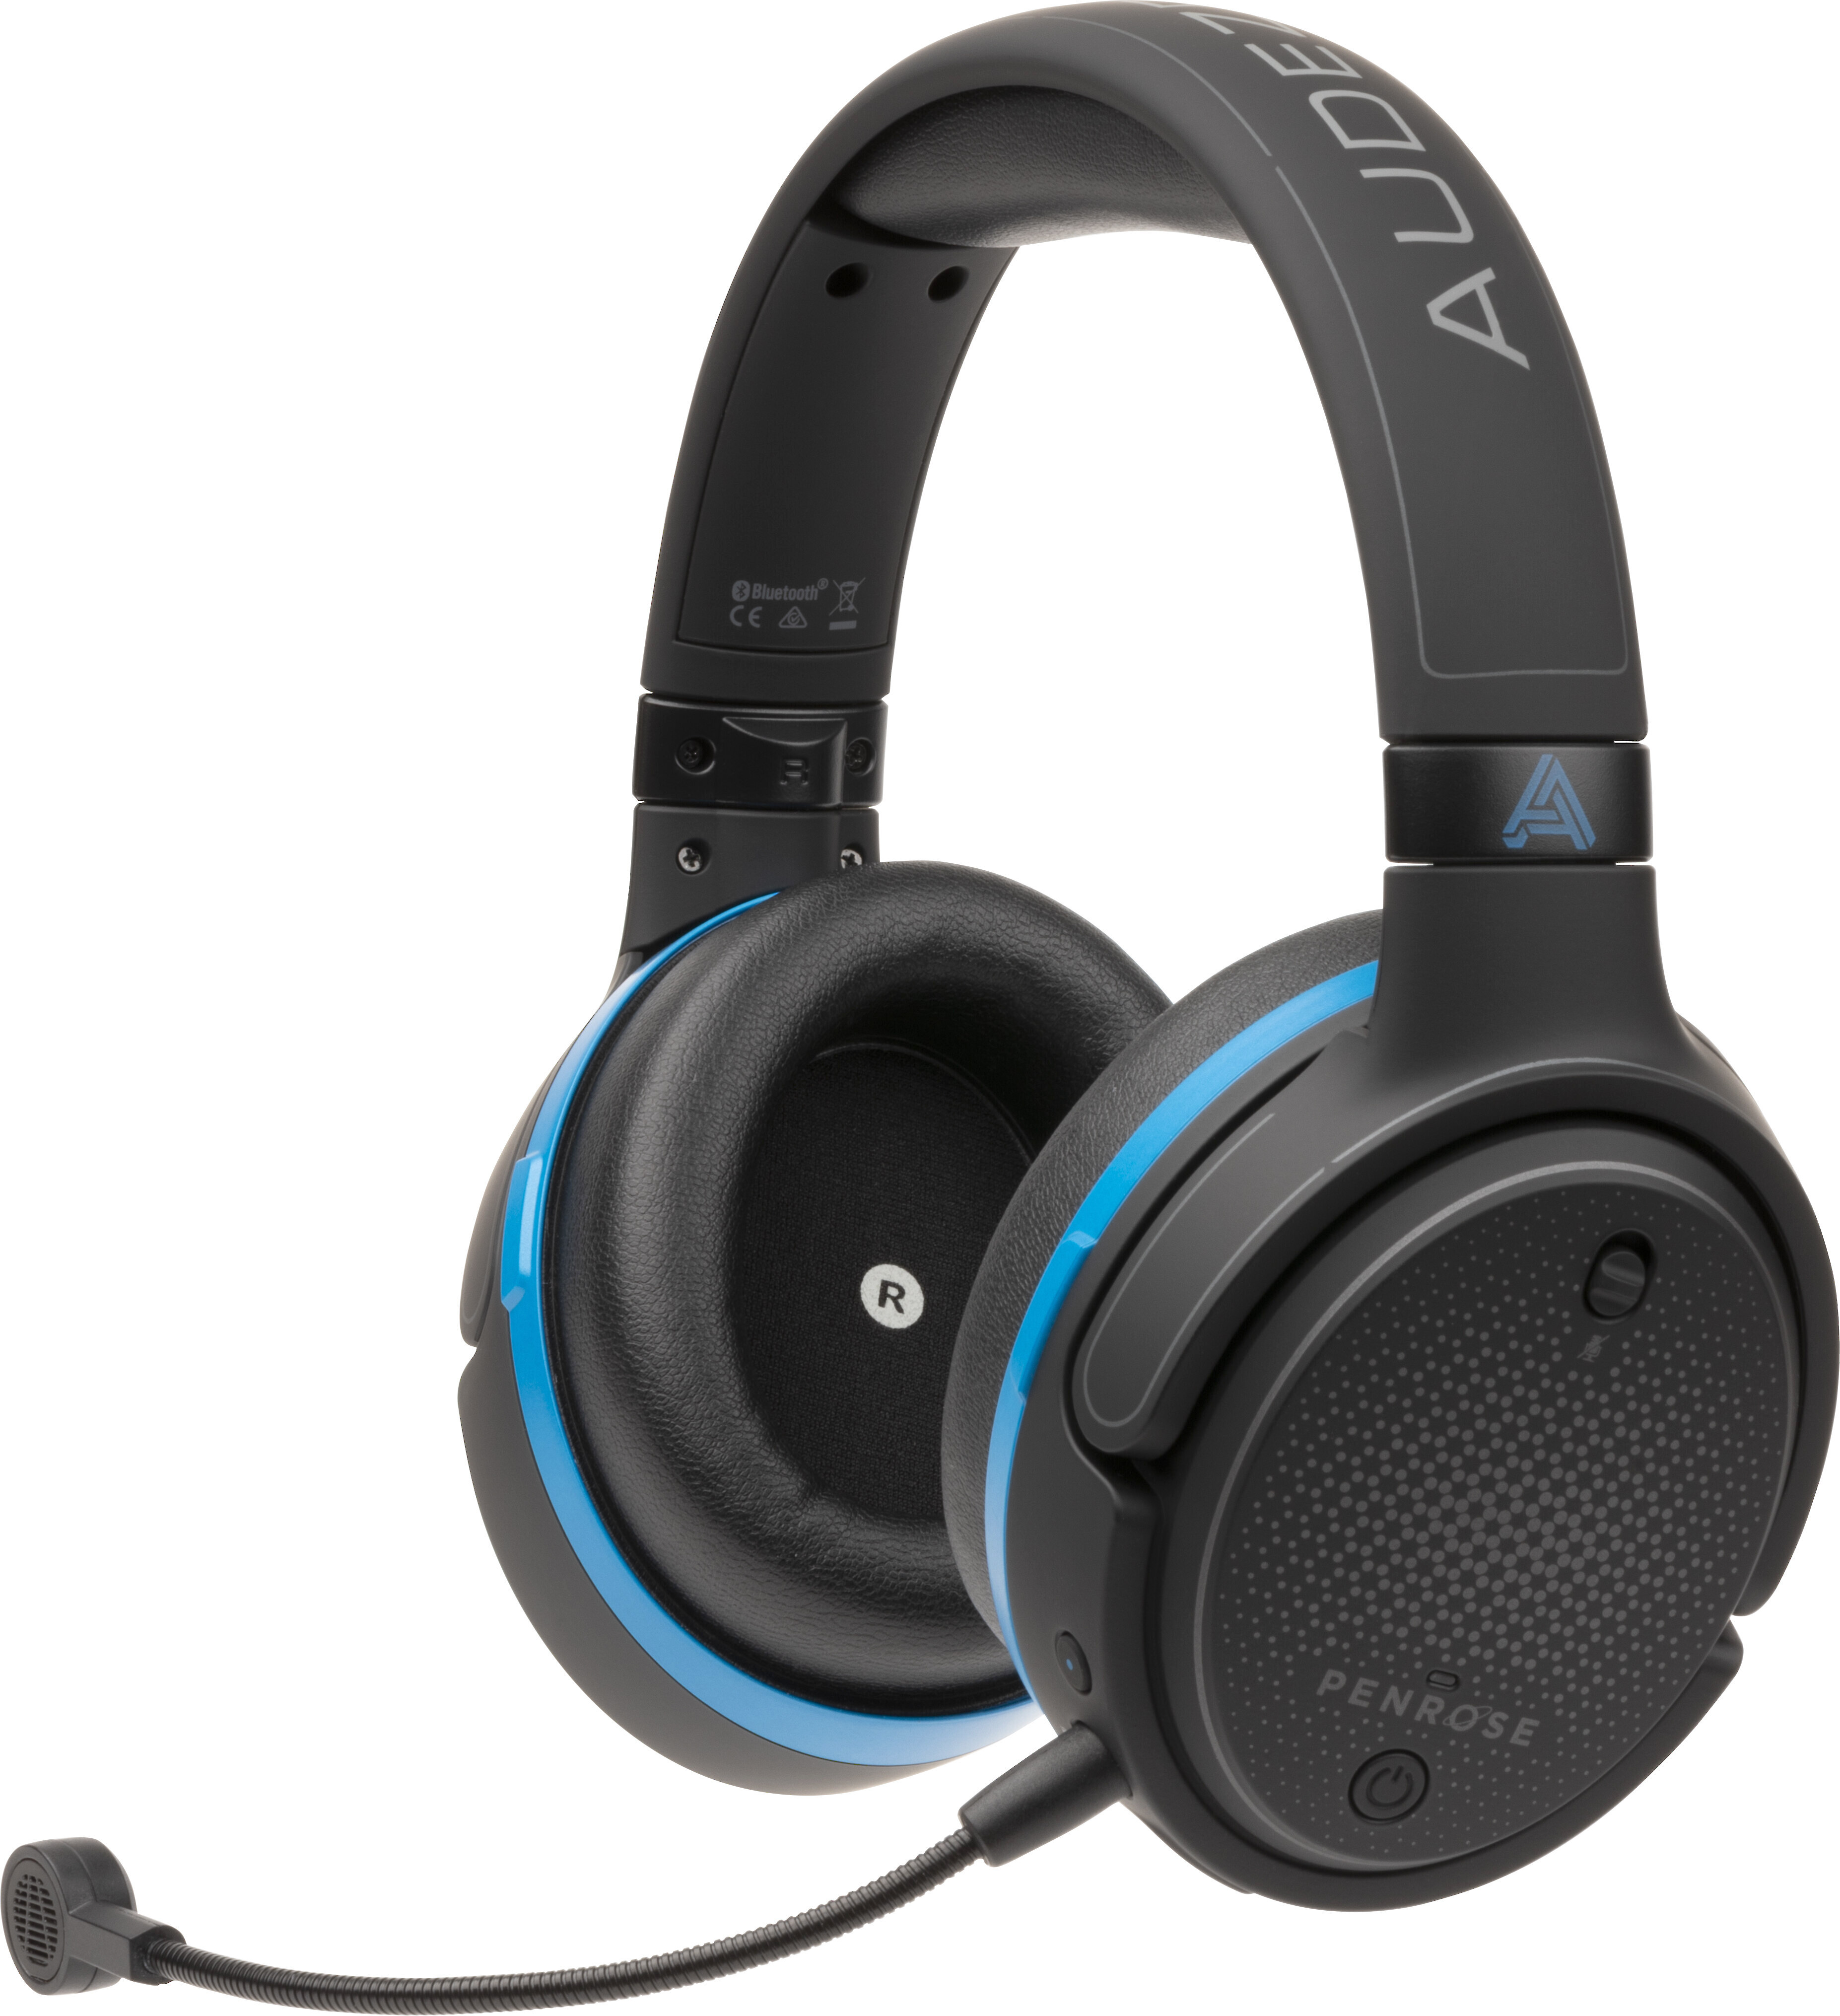 JBL Quantum 910 Professional wireless noise-canceling gaming headset with  Bluetooth® for PS4, PS5, Switch, PC, and Mac® at Crutchfield